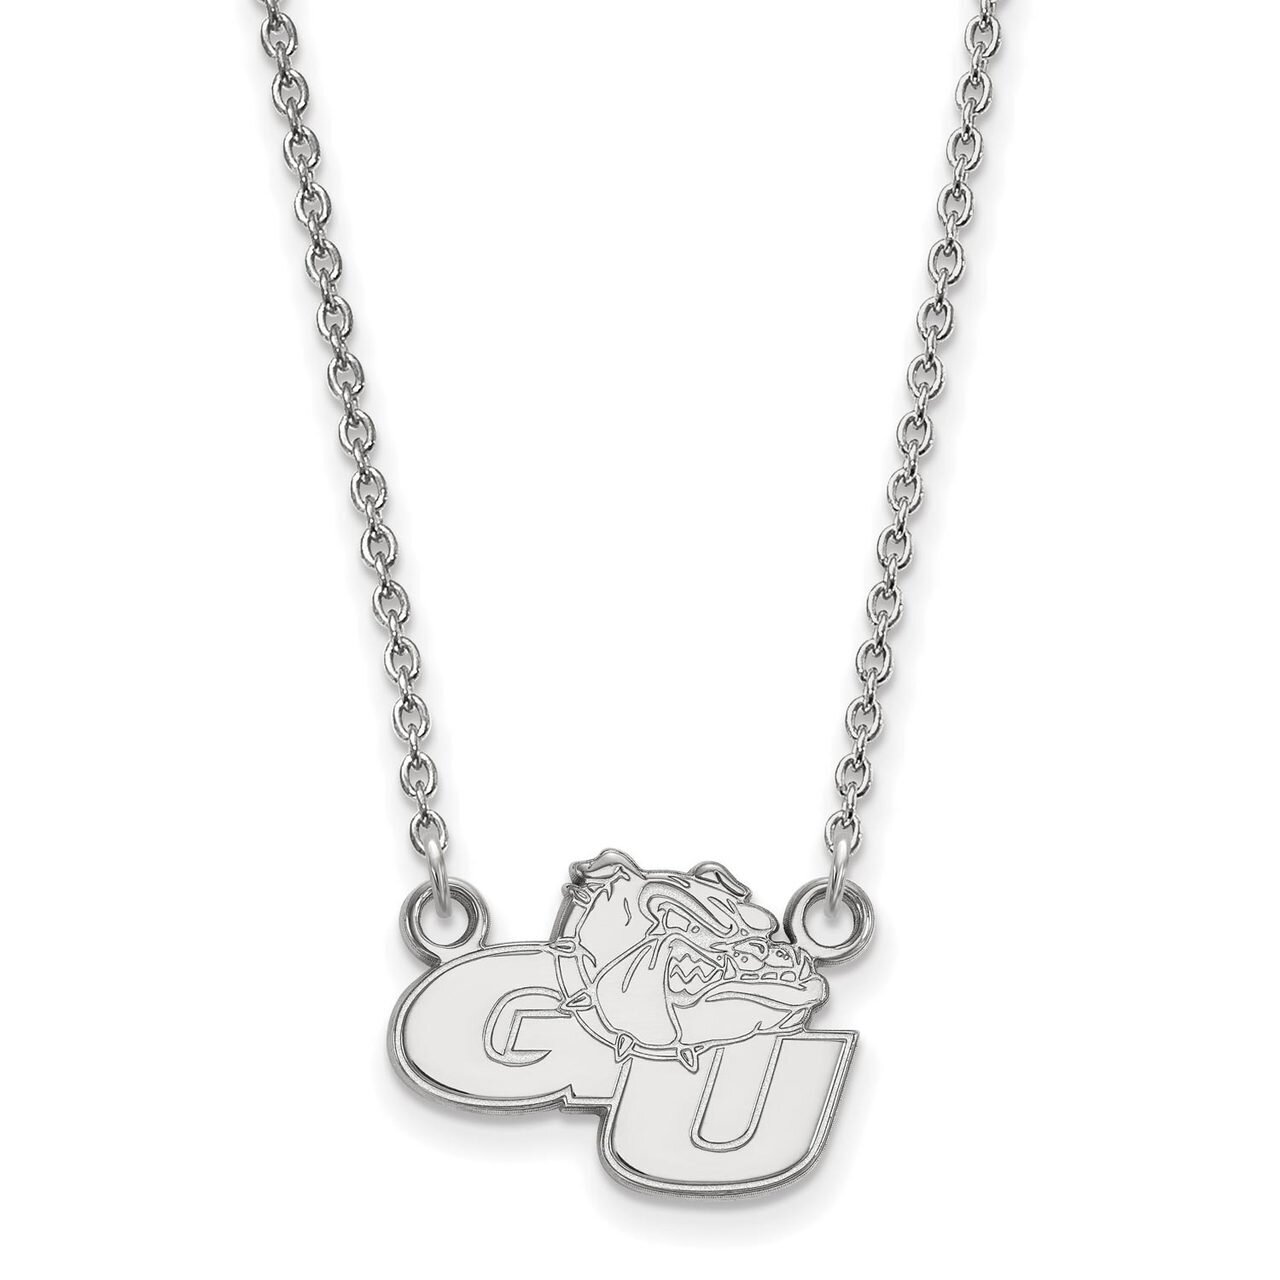 Gonzaga University Small Pendant with Chain Necklace 10k White Gold 1W007GON-18